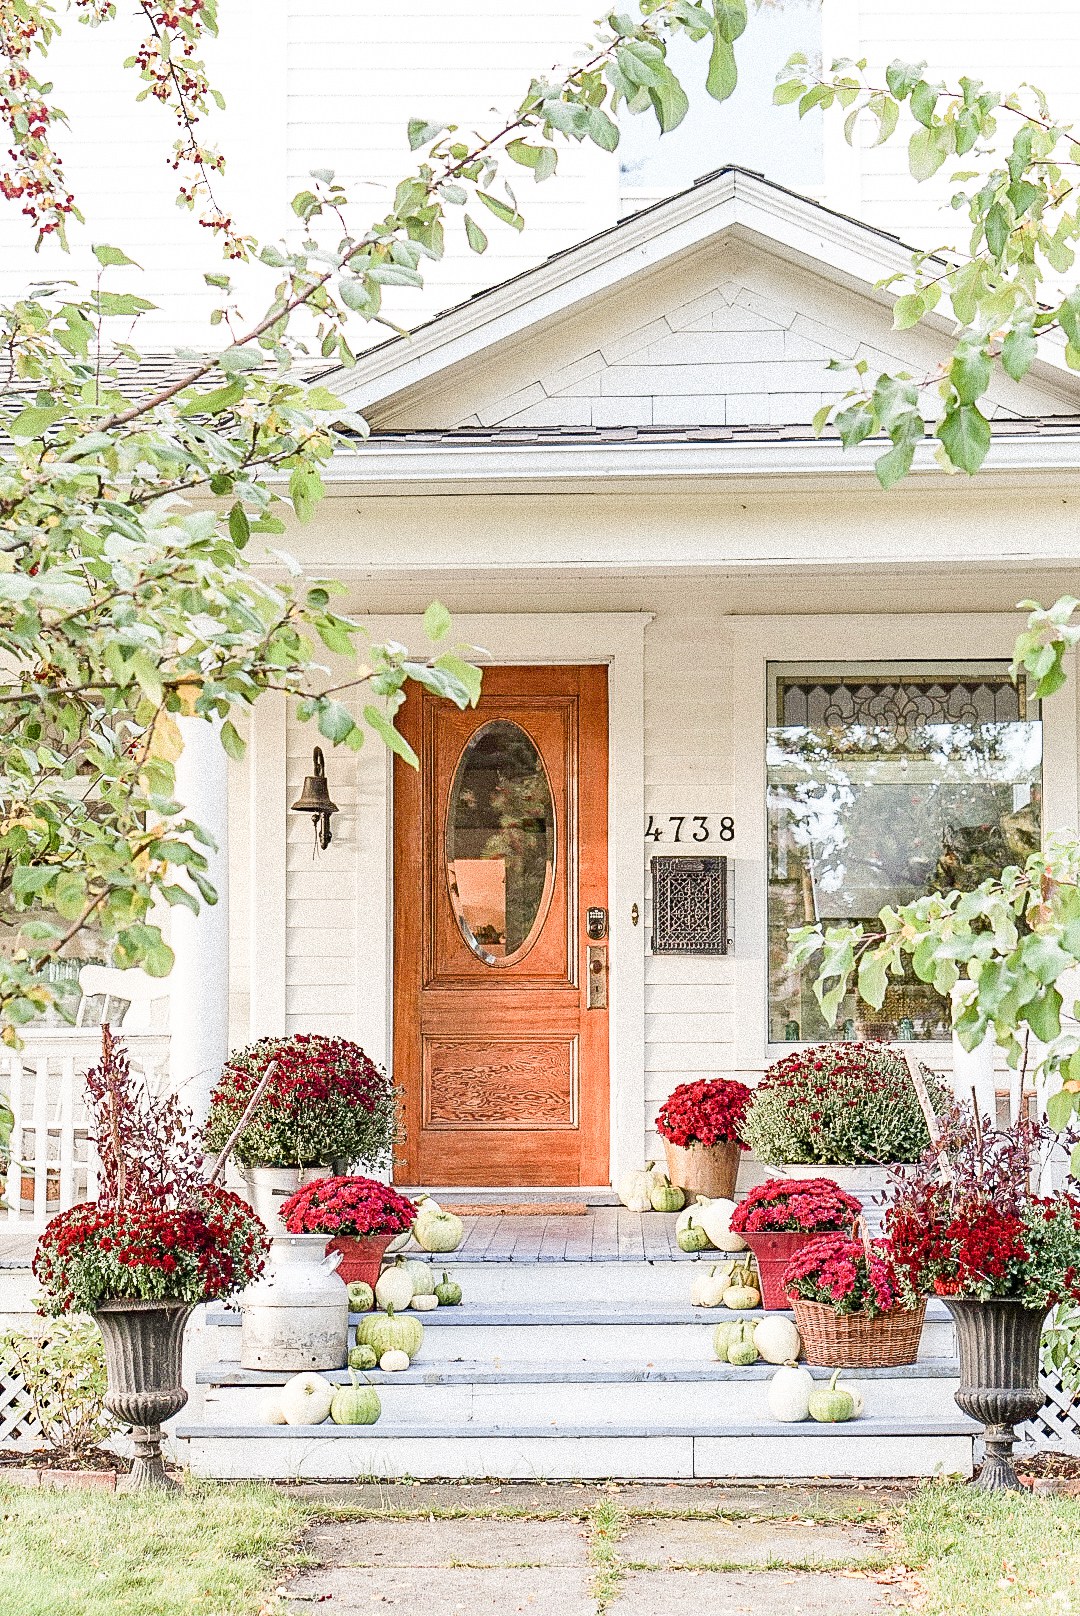 Eclectic Home Tour of B Vintage Style - love this stunning fall front porch filled with colorful mums kellyelko.com #fall #fallporch #falldecor #mums #autumndecor #autumnporch 